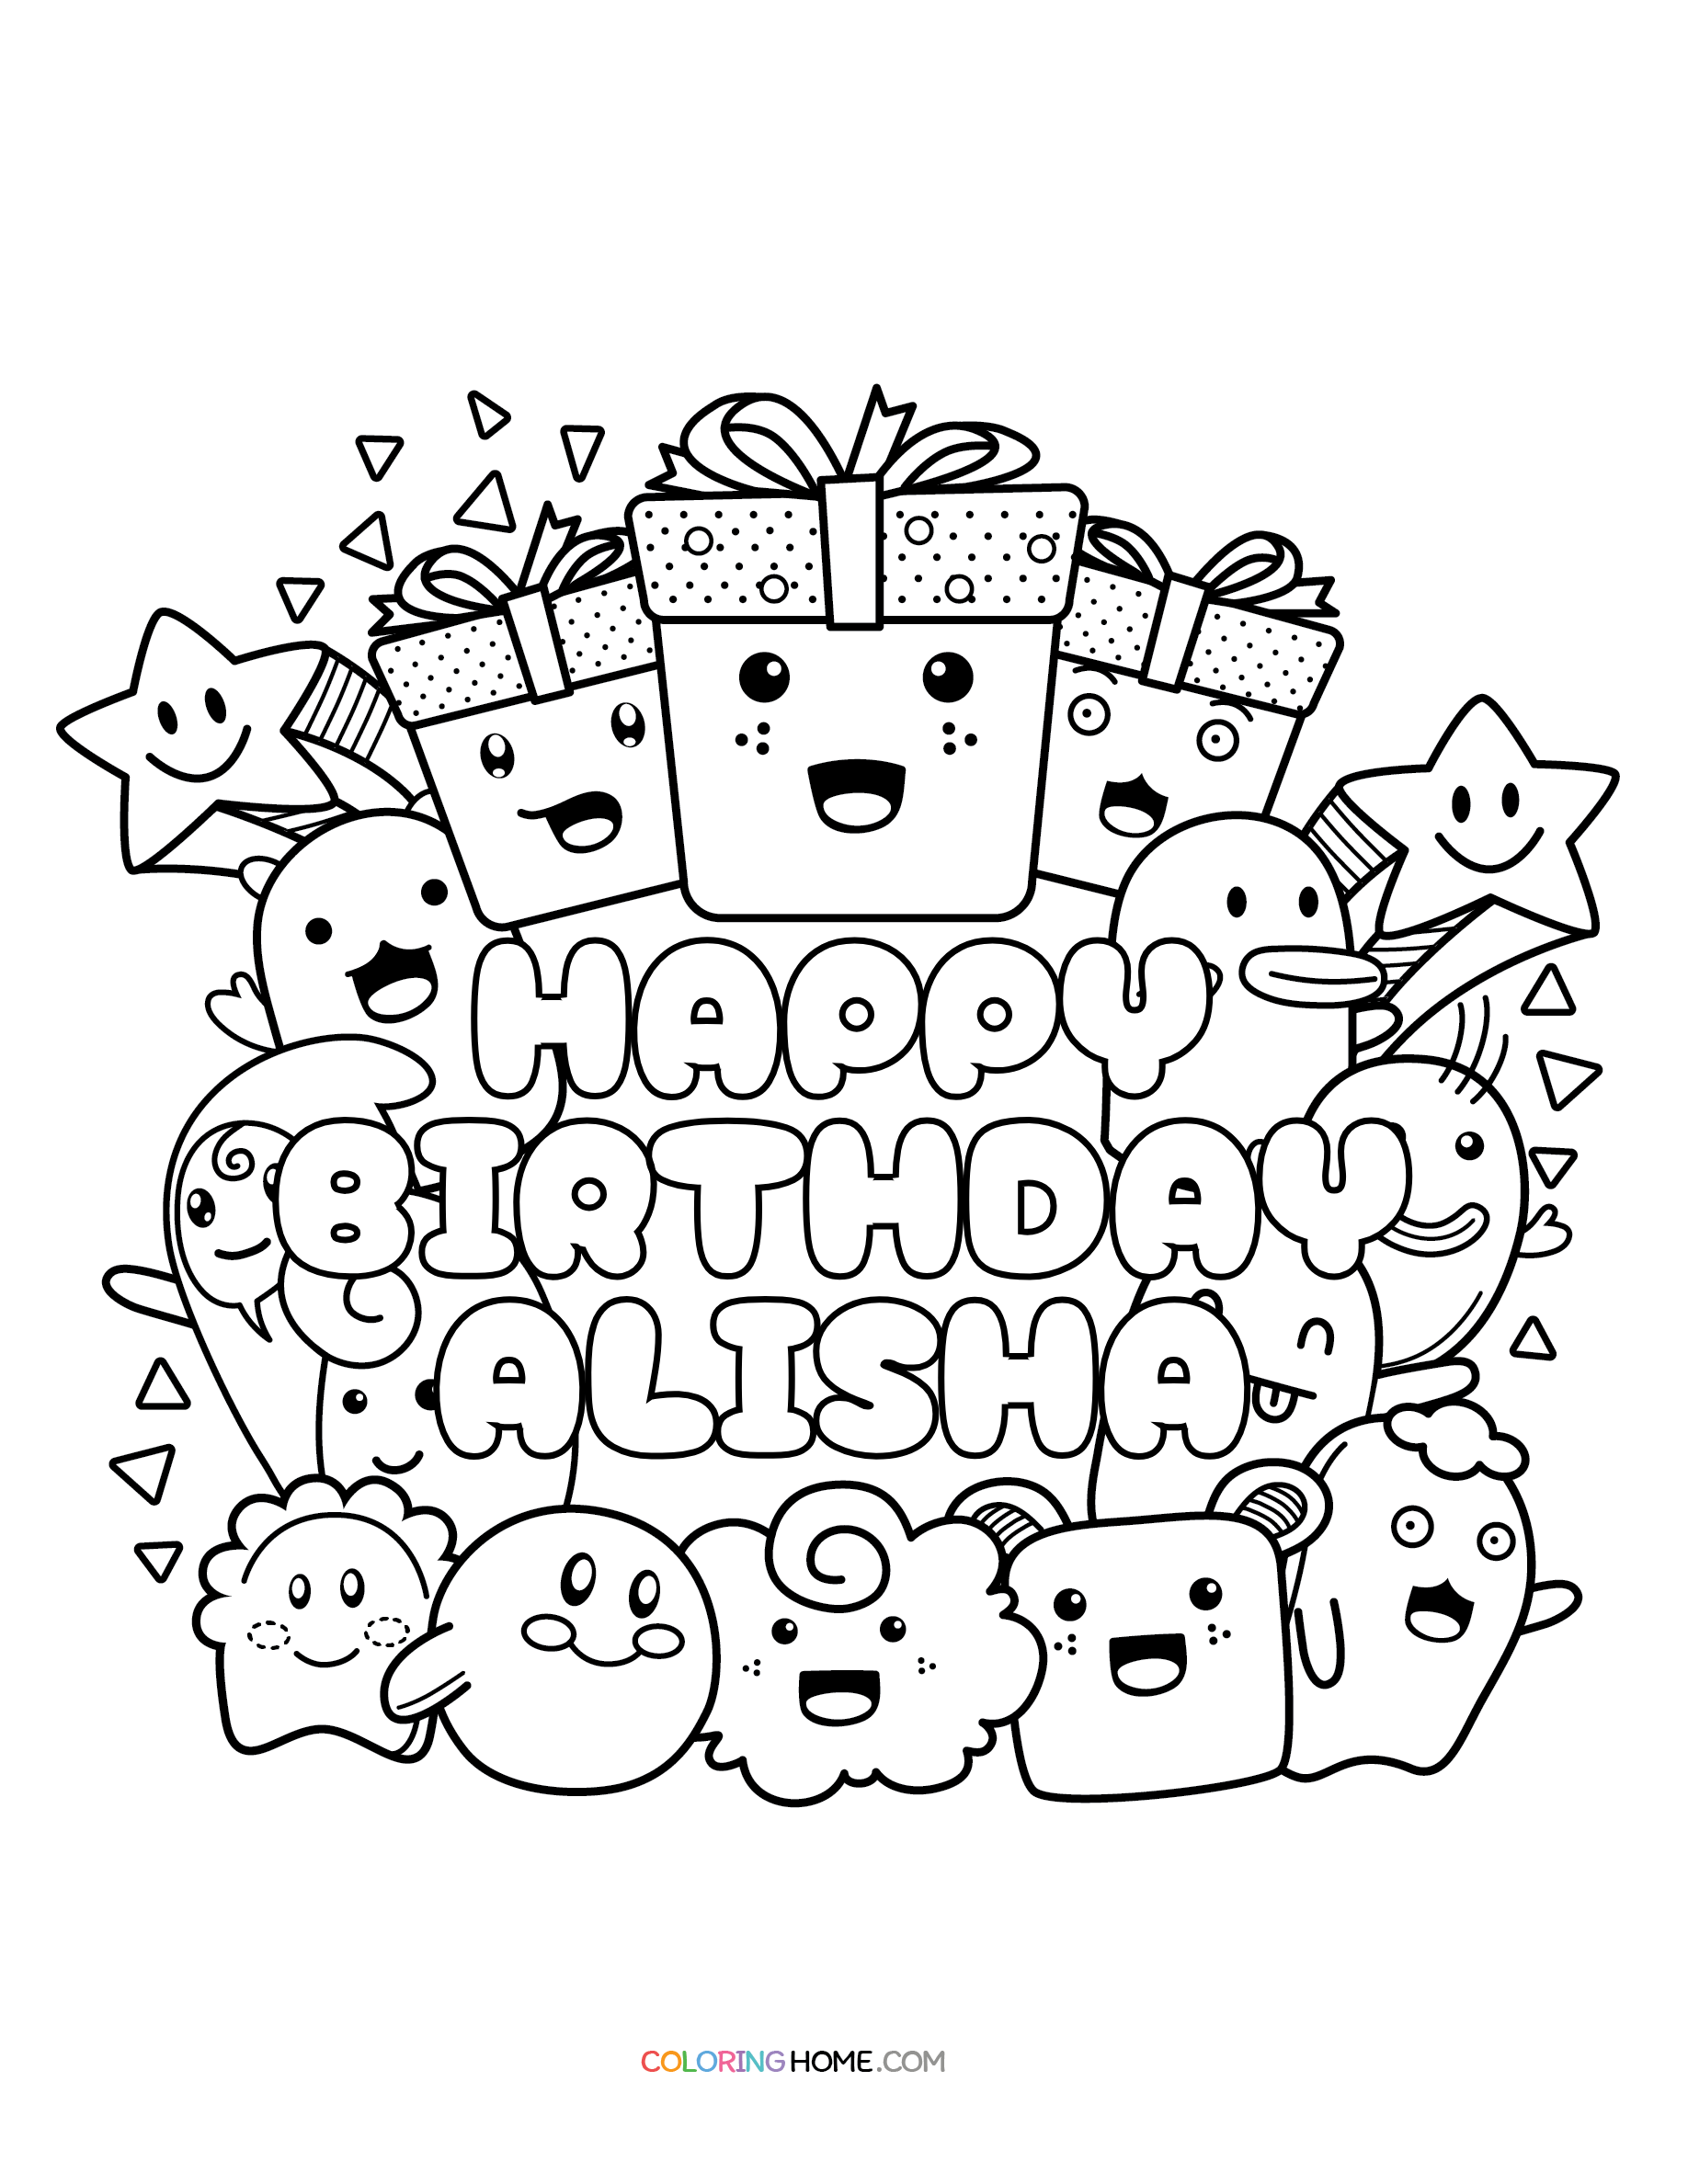 Alisha Name Coloring Pages - Coloring Home